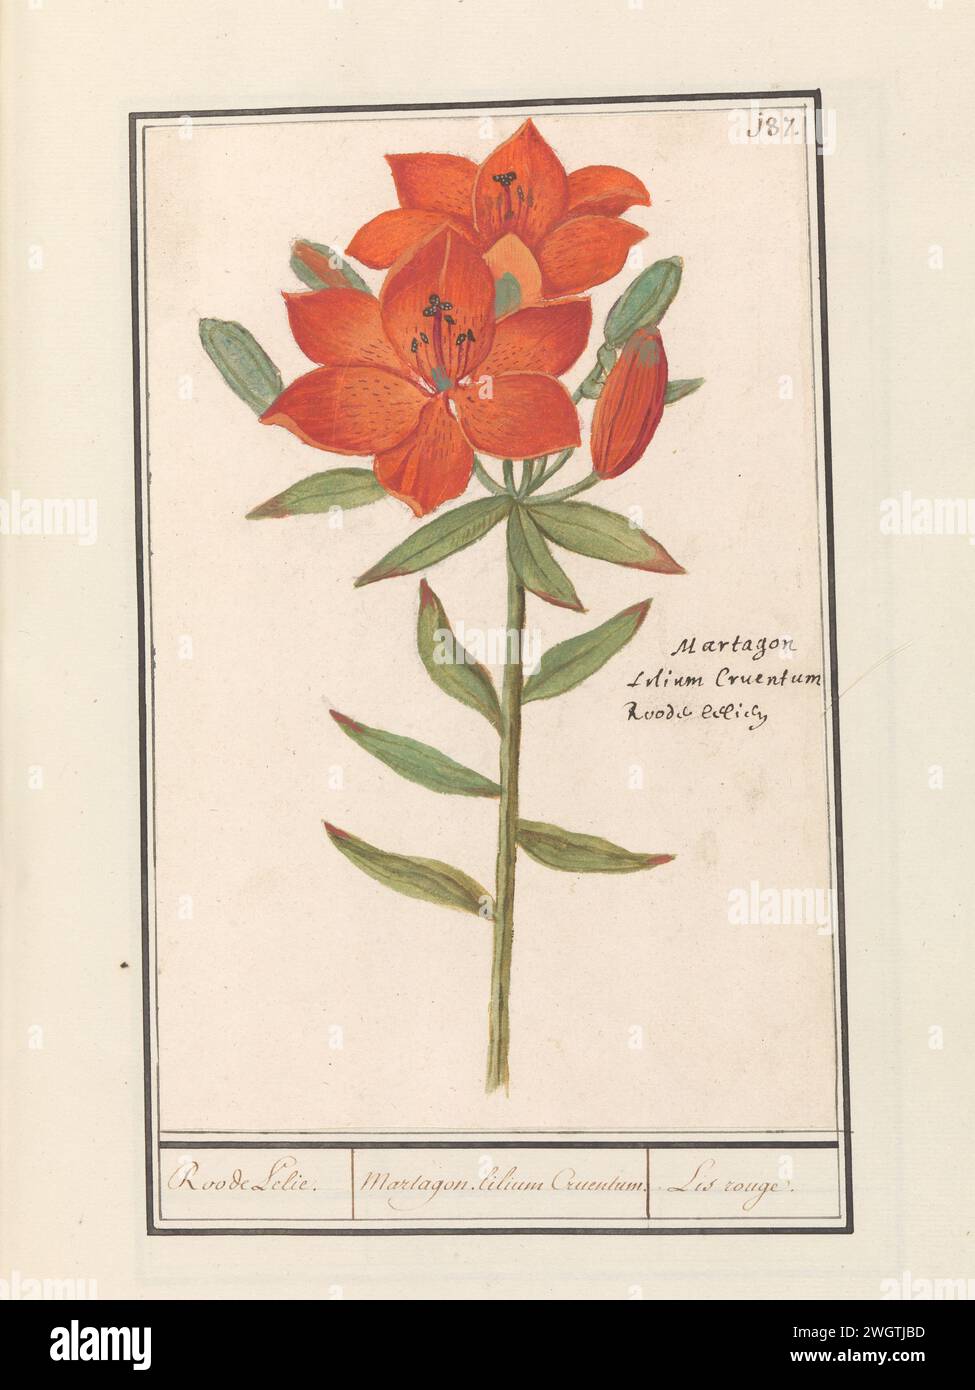 Rode Lelie (Lilium), Anselm Boëtius de Boodt, 1596 - 1610 drawing Oranjerode Lelie. Numbered at the top right: 187. On the right the Latin and Dutch name. Part of the second album with drawings of flowers and plants. Ninth of twelve albums with drawings of animals, birds and plants known around 1600, made commissioned by Emperor Rudolf II. With explanation in Dutch, Latin and French. draughtsman: Praagdraughtsman: Delft paper. watercolor (paint). deck paint. chalk. ink brush / pen flowers: lily Stock Photo